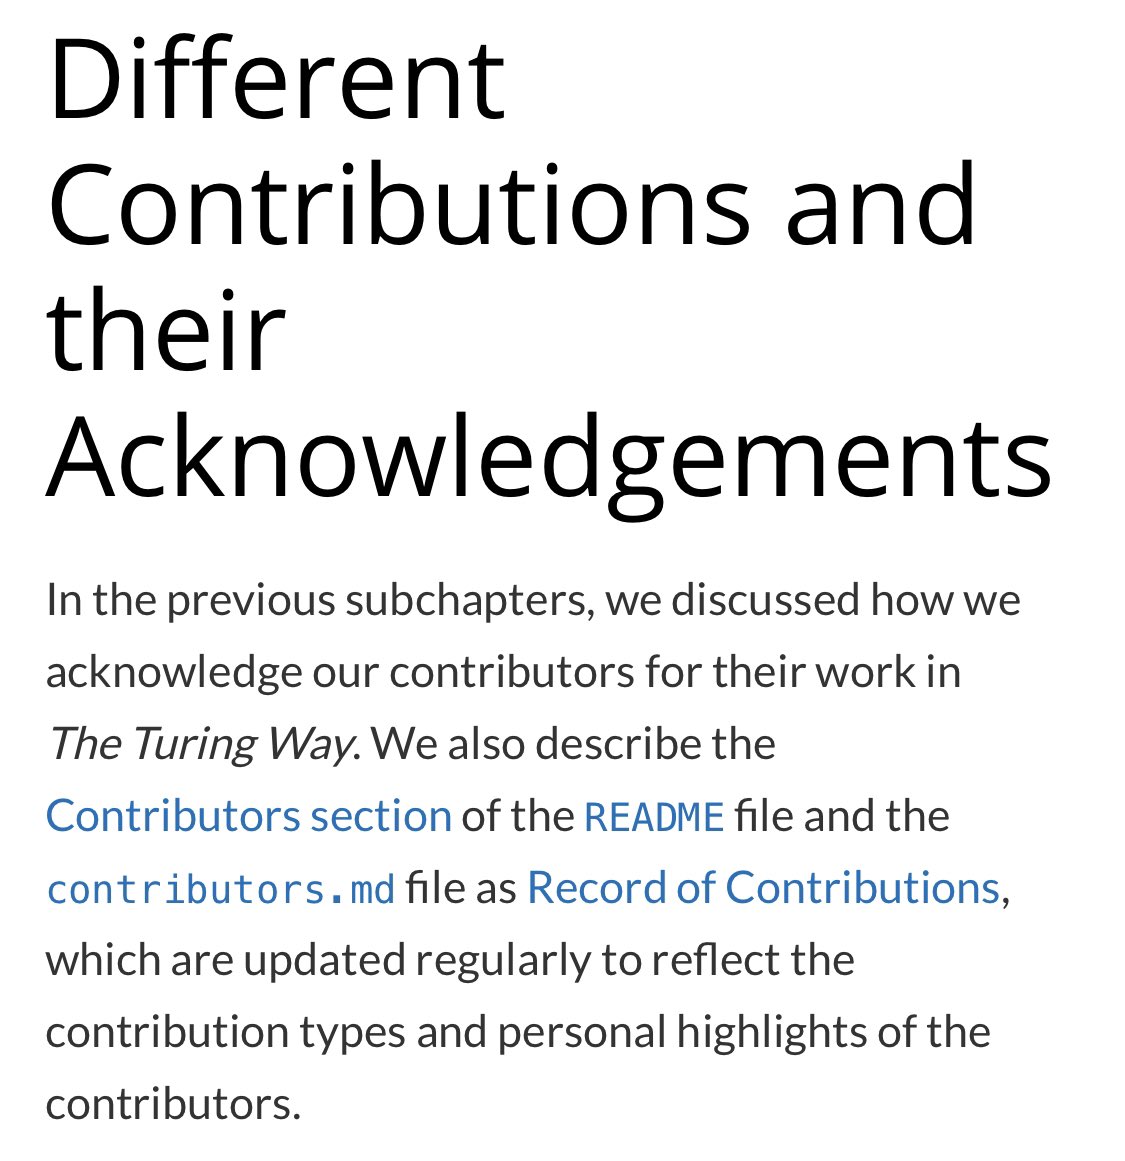 I had a bunch of fun with a random name generator writing up example personas in the Different Contributions and their Acknowledgments chapter!Check it out-there are so many ways to help us out. Be like Kendra, Jordon & Yan   https://the-turing-way.netlify.app/community-handbook/acknowledgement/acknowledgement-examples.html #AcknowledgeAllTheWork